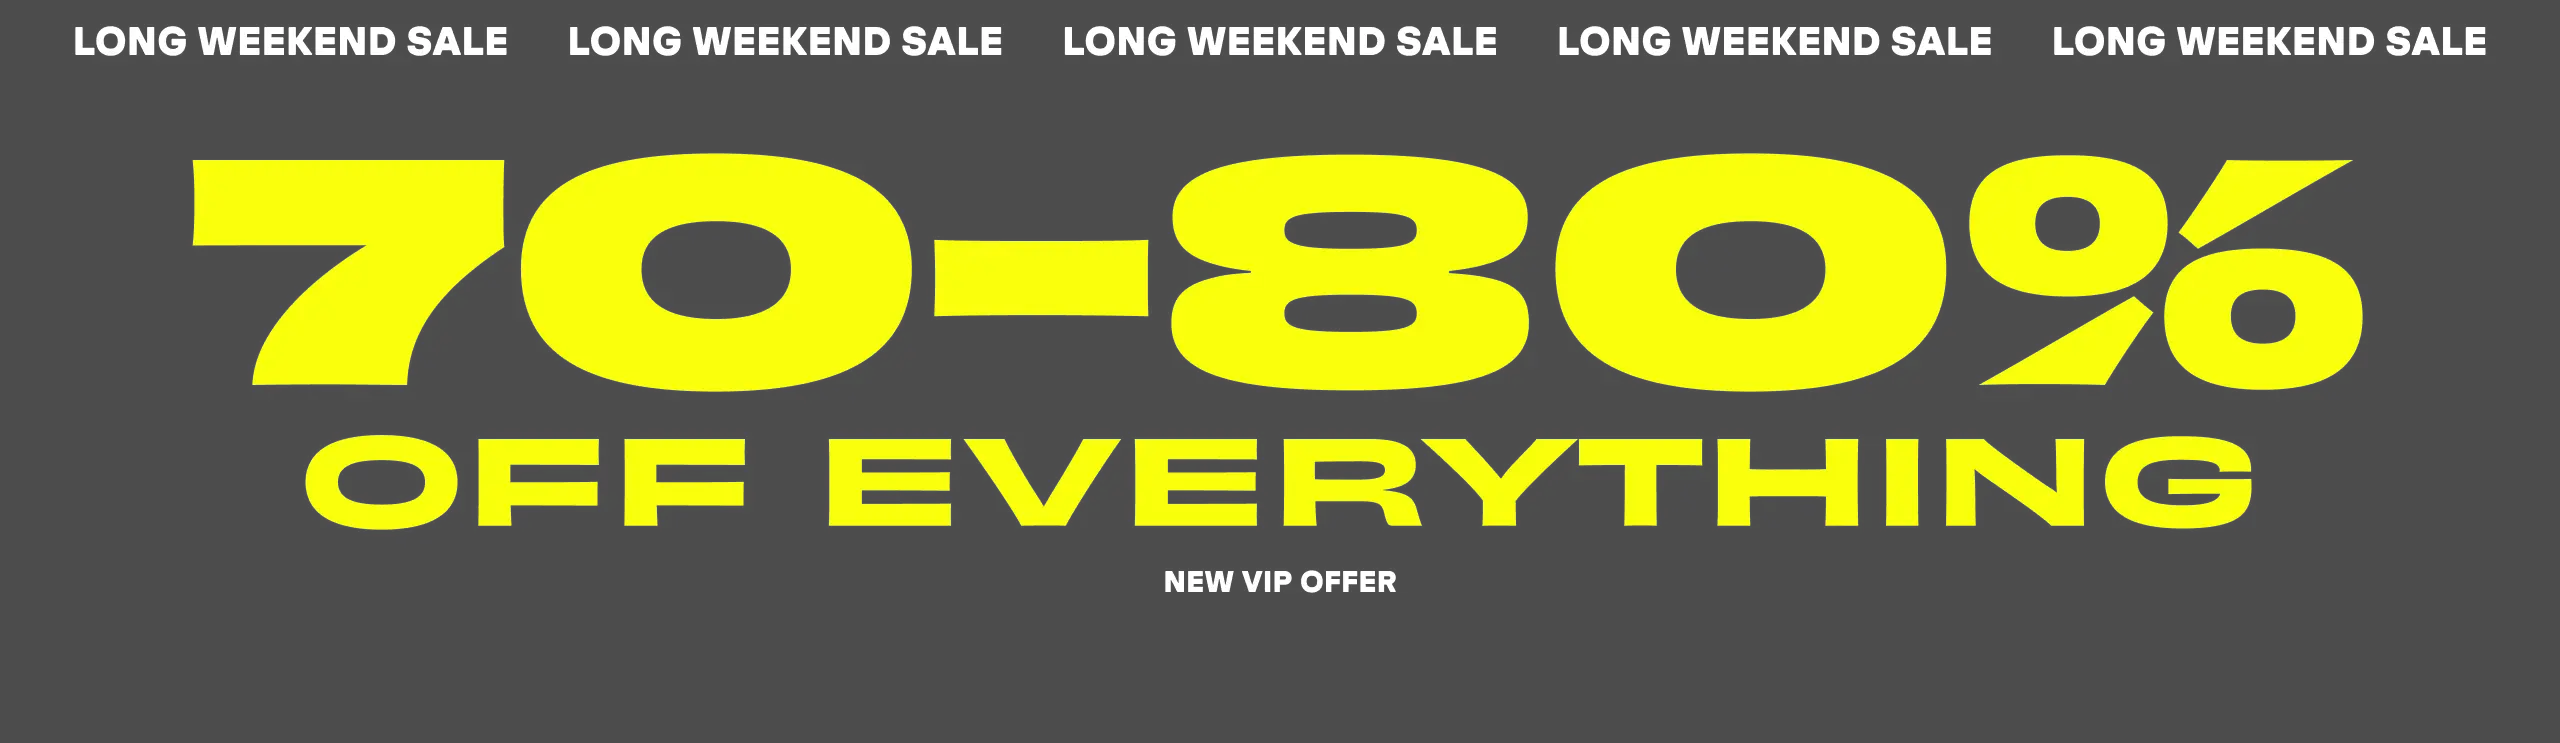 Long weekend sale extended! Get your 1 time new VIP intro offer. Click to get started.